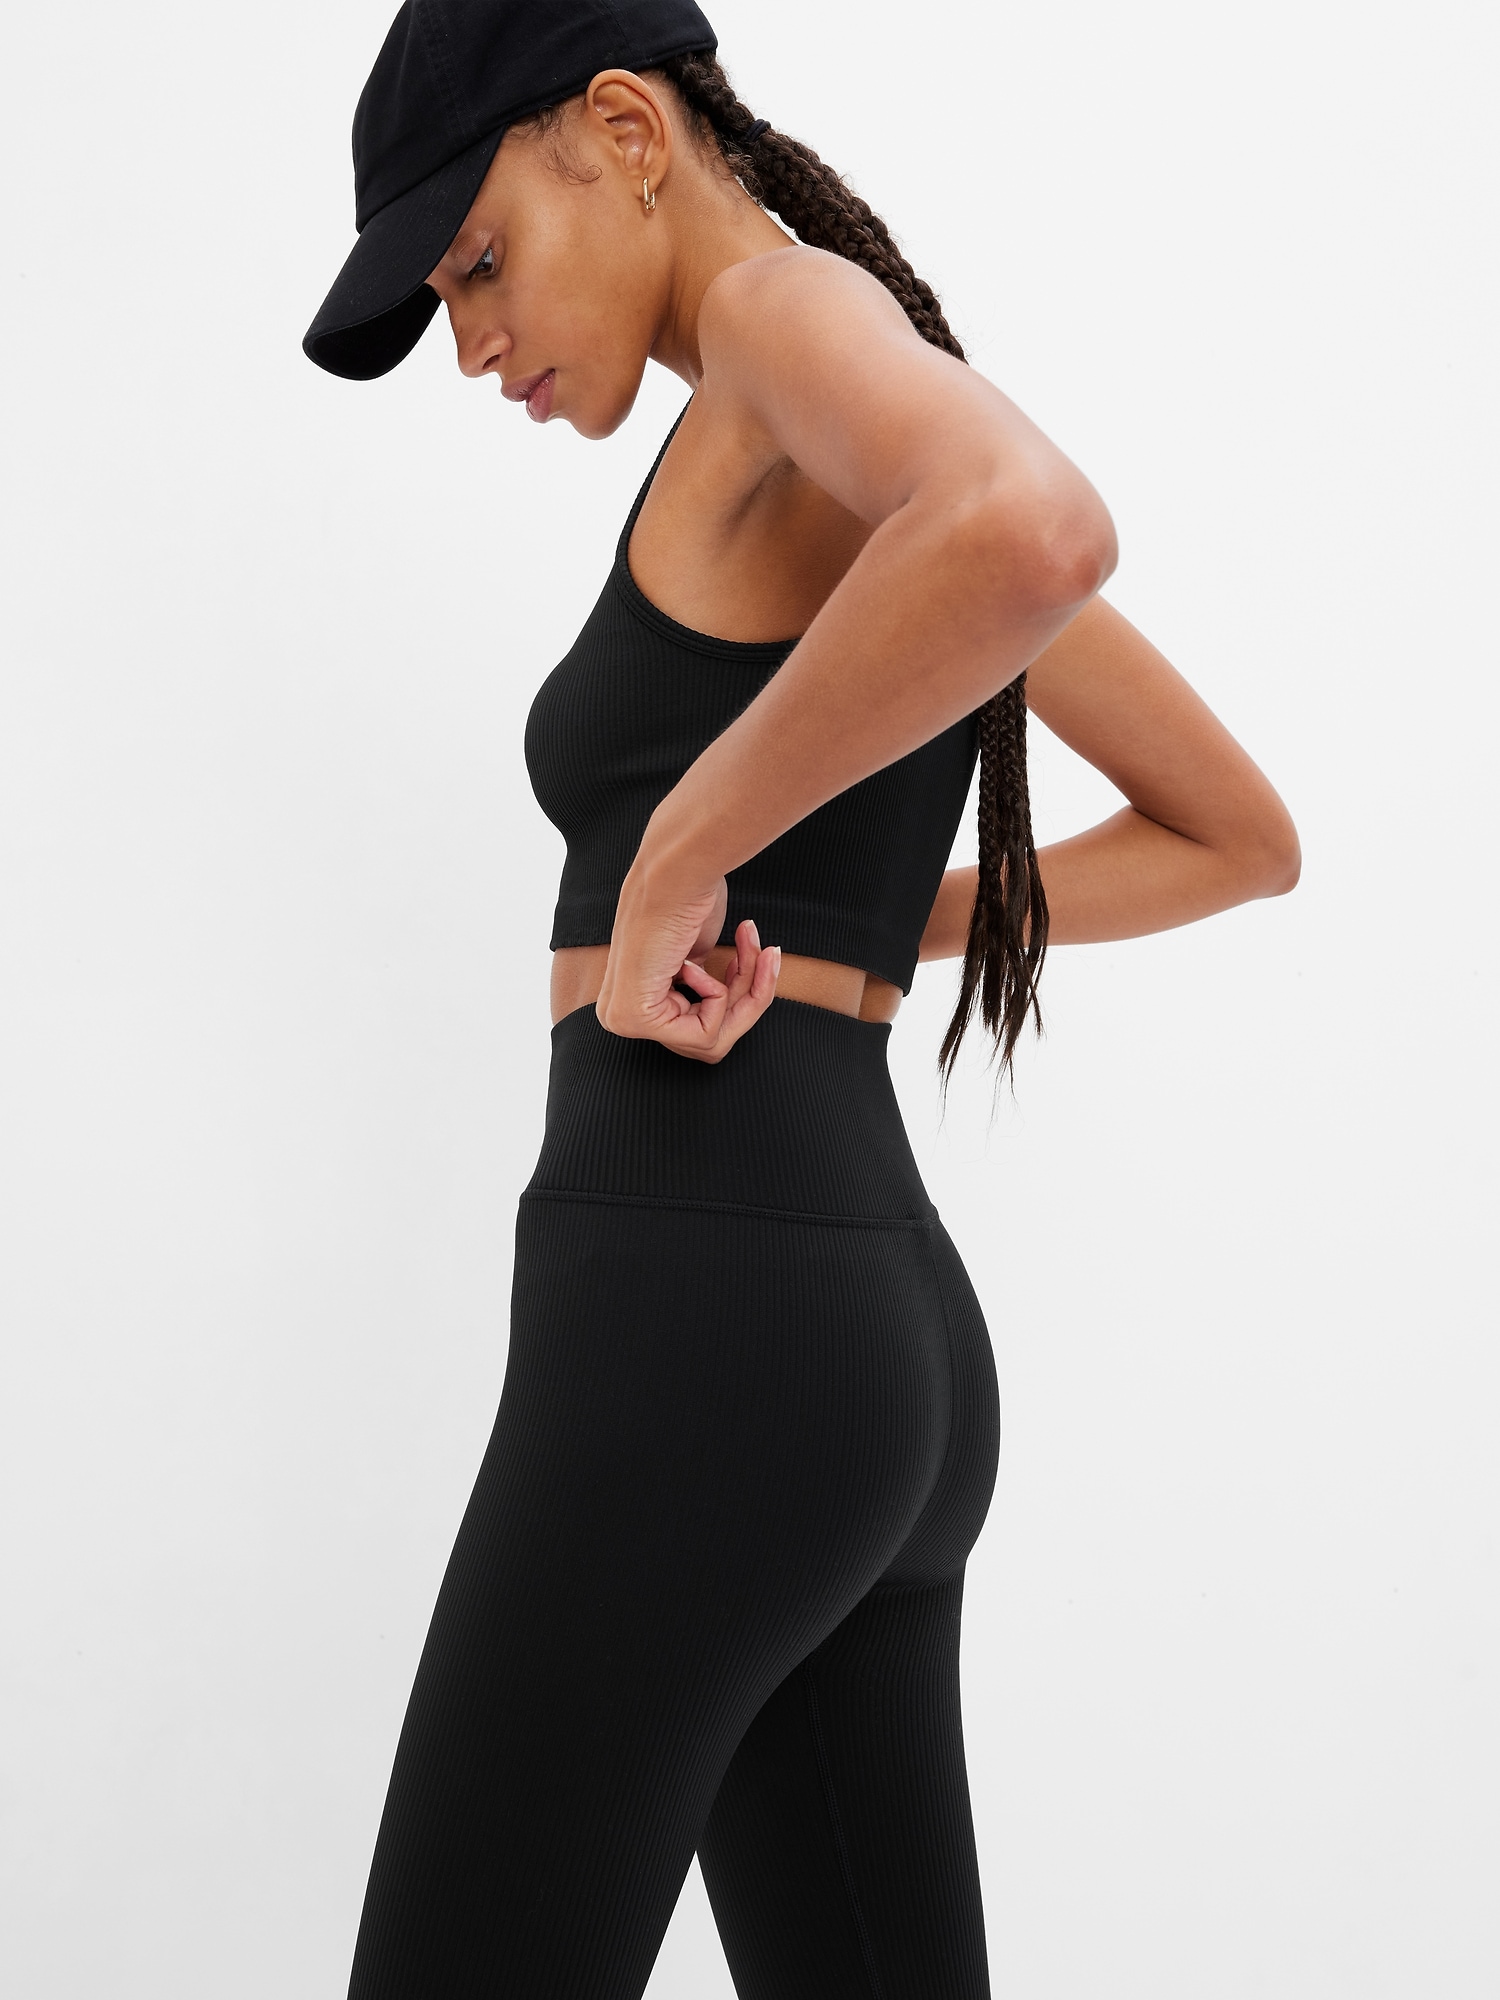 Gap Fit Ribbed Seamless Active Matching Set Try On and Review #gap